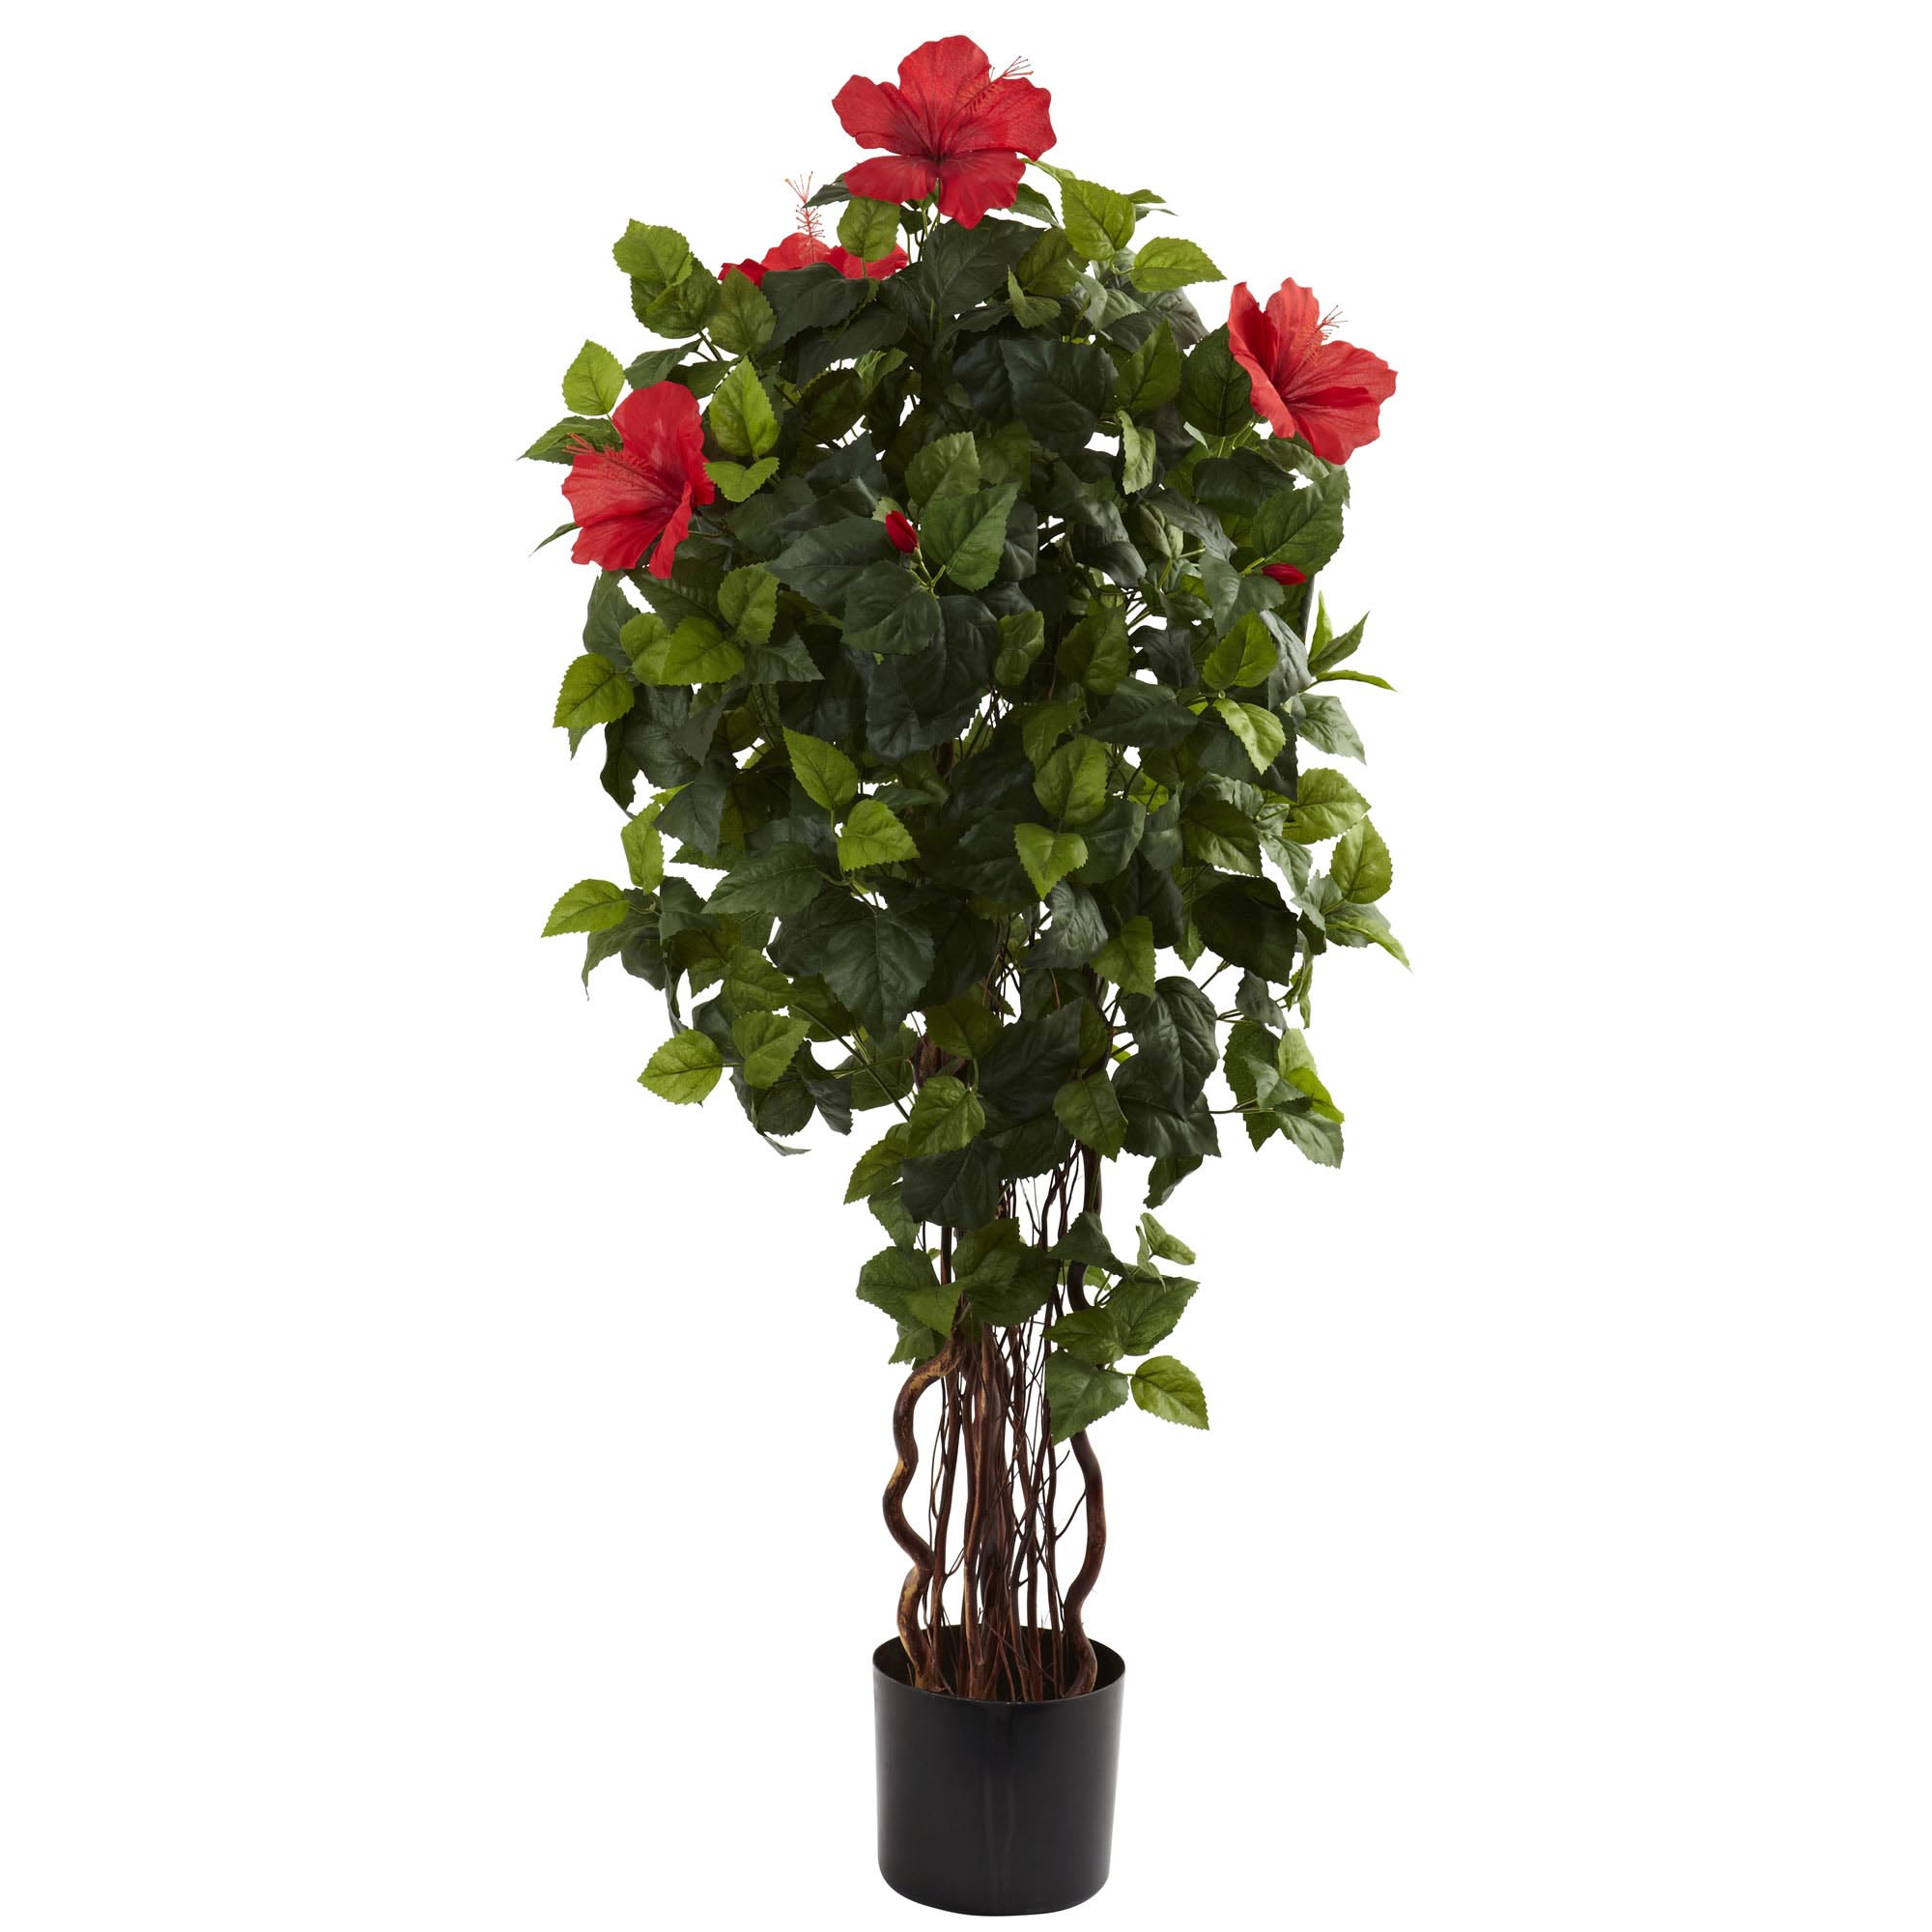 4 Foot Artificial Hibiscus Tree : Potted